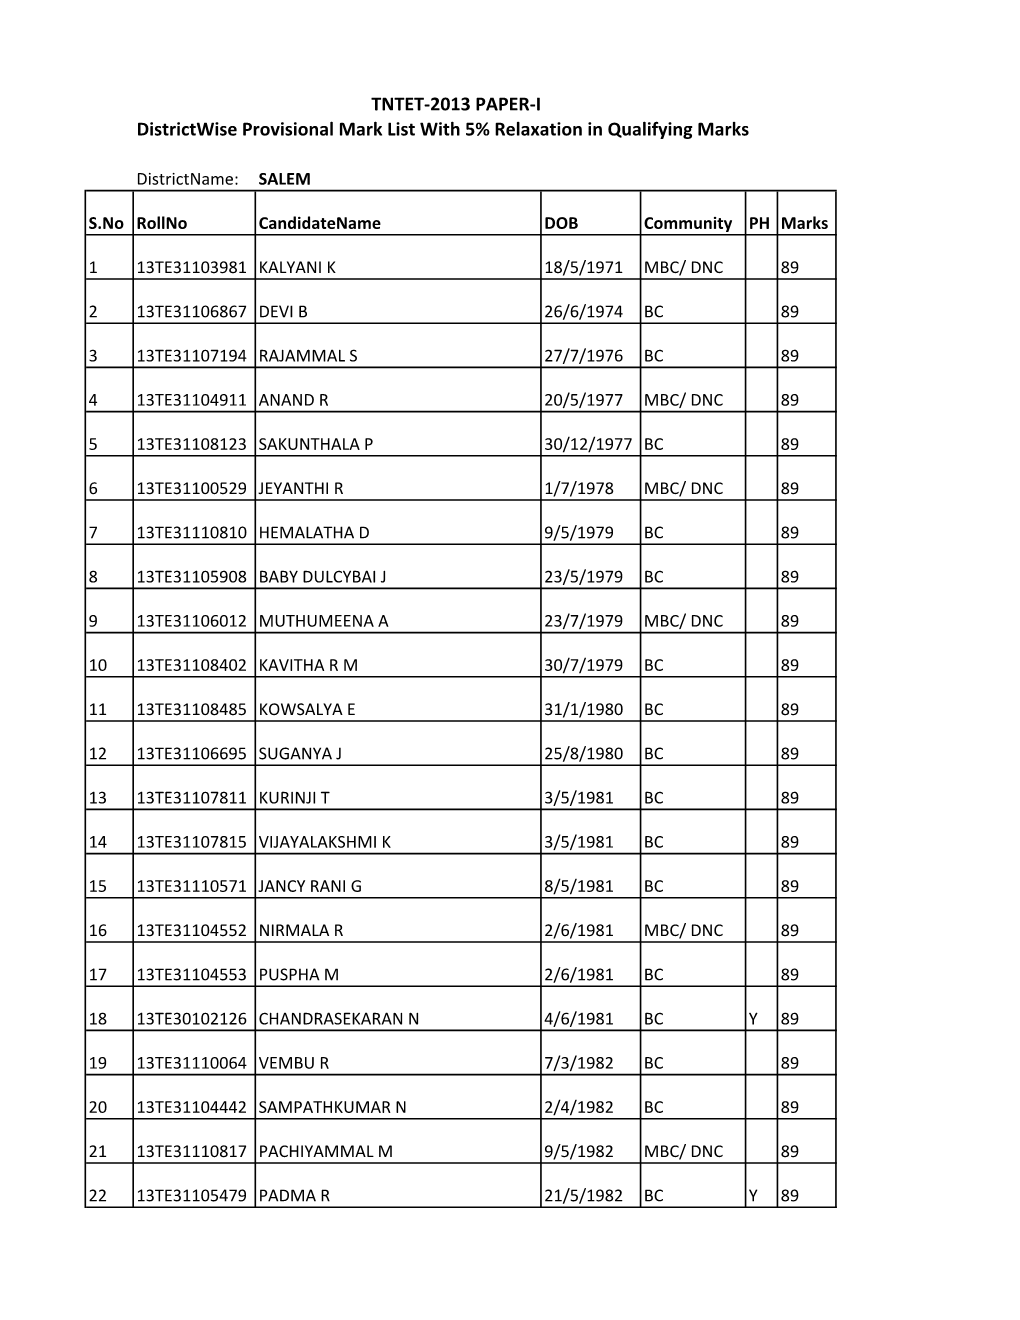 TNTET-2013 PAPER-I Districtwise Provisional Mark List with 5